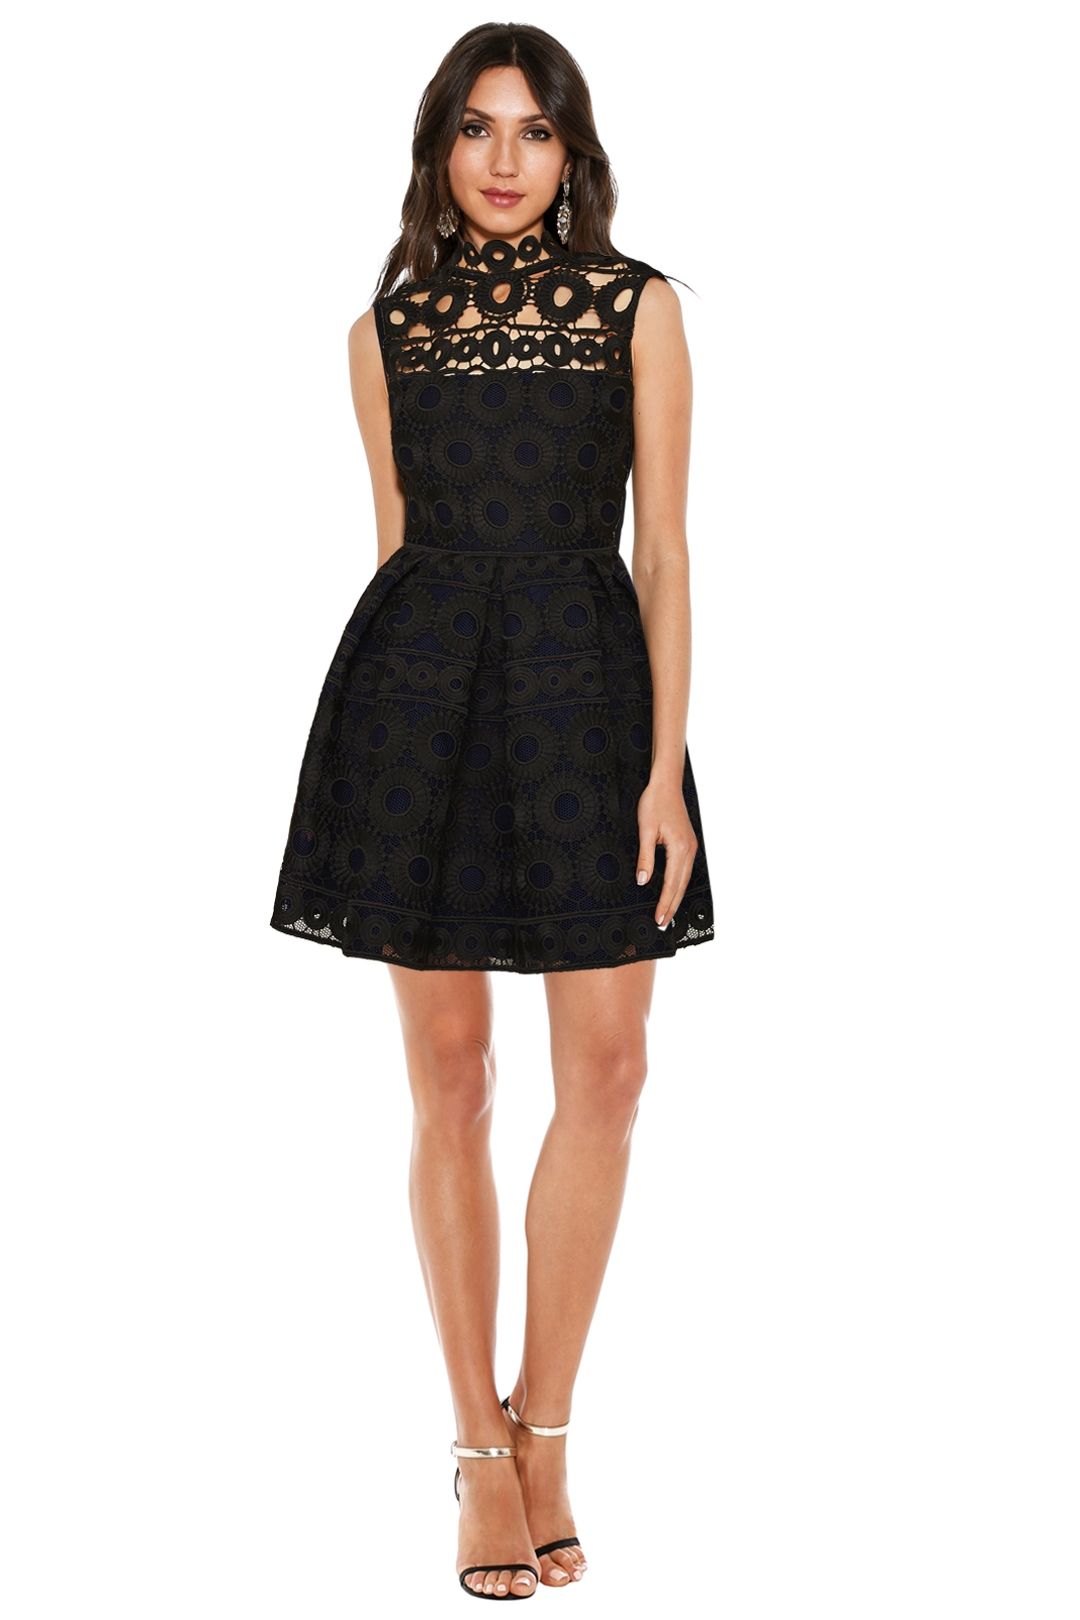 Maje - Rodeo Bonded Lace Guipure Dress - Black - Front